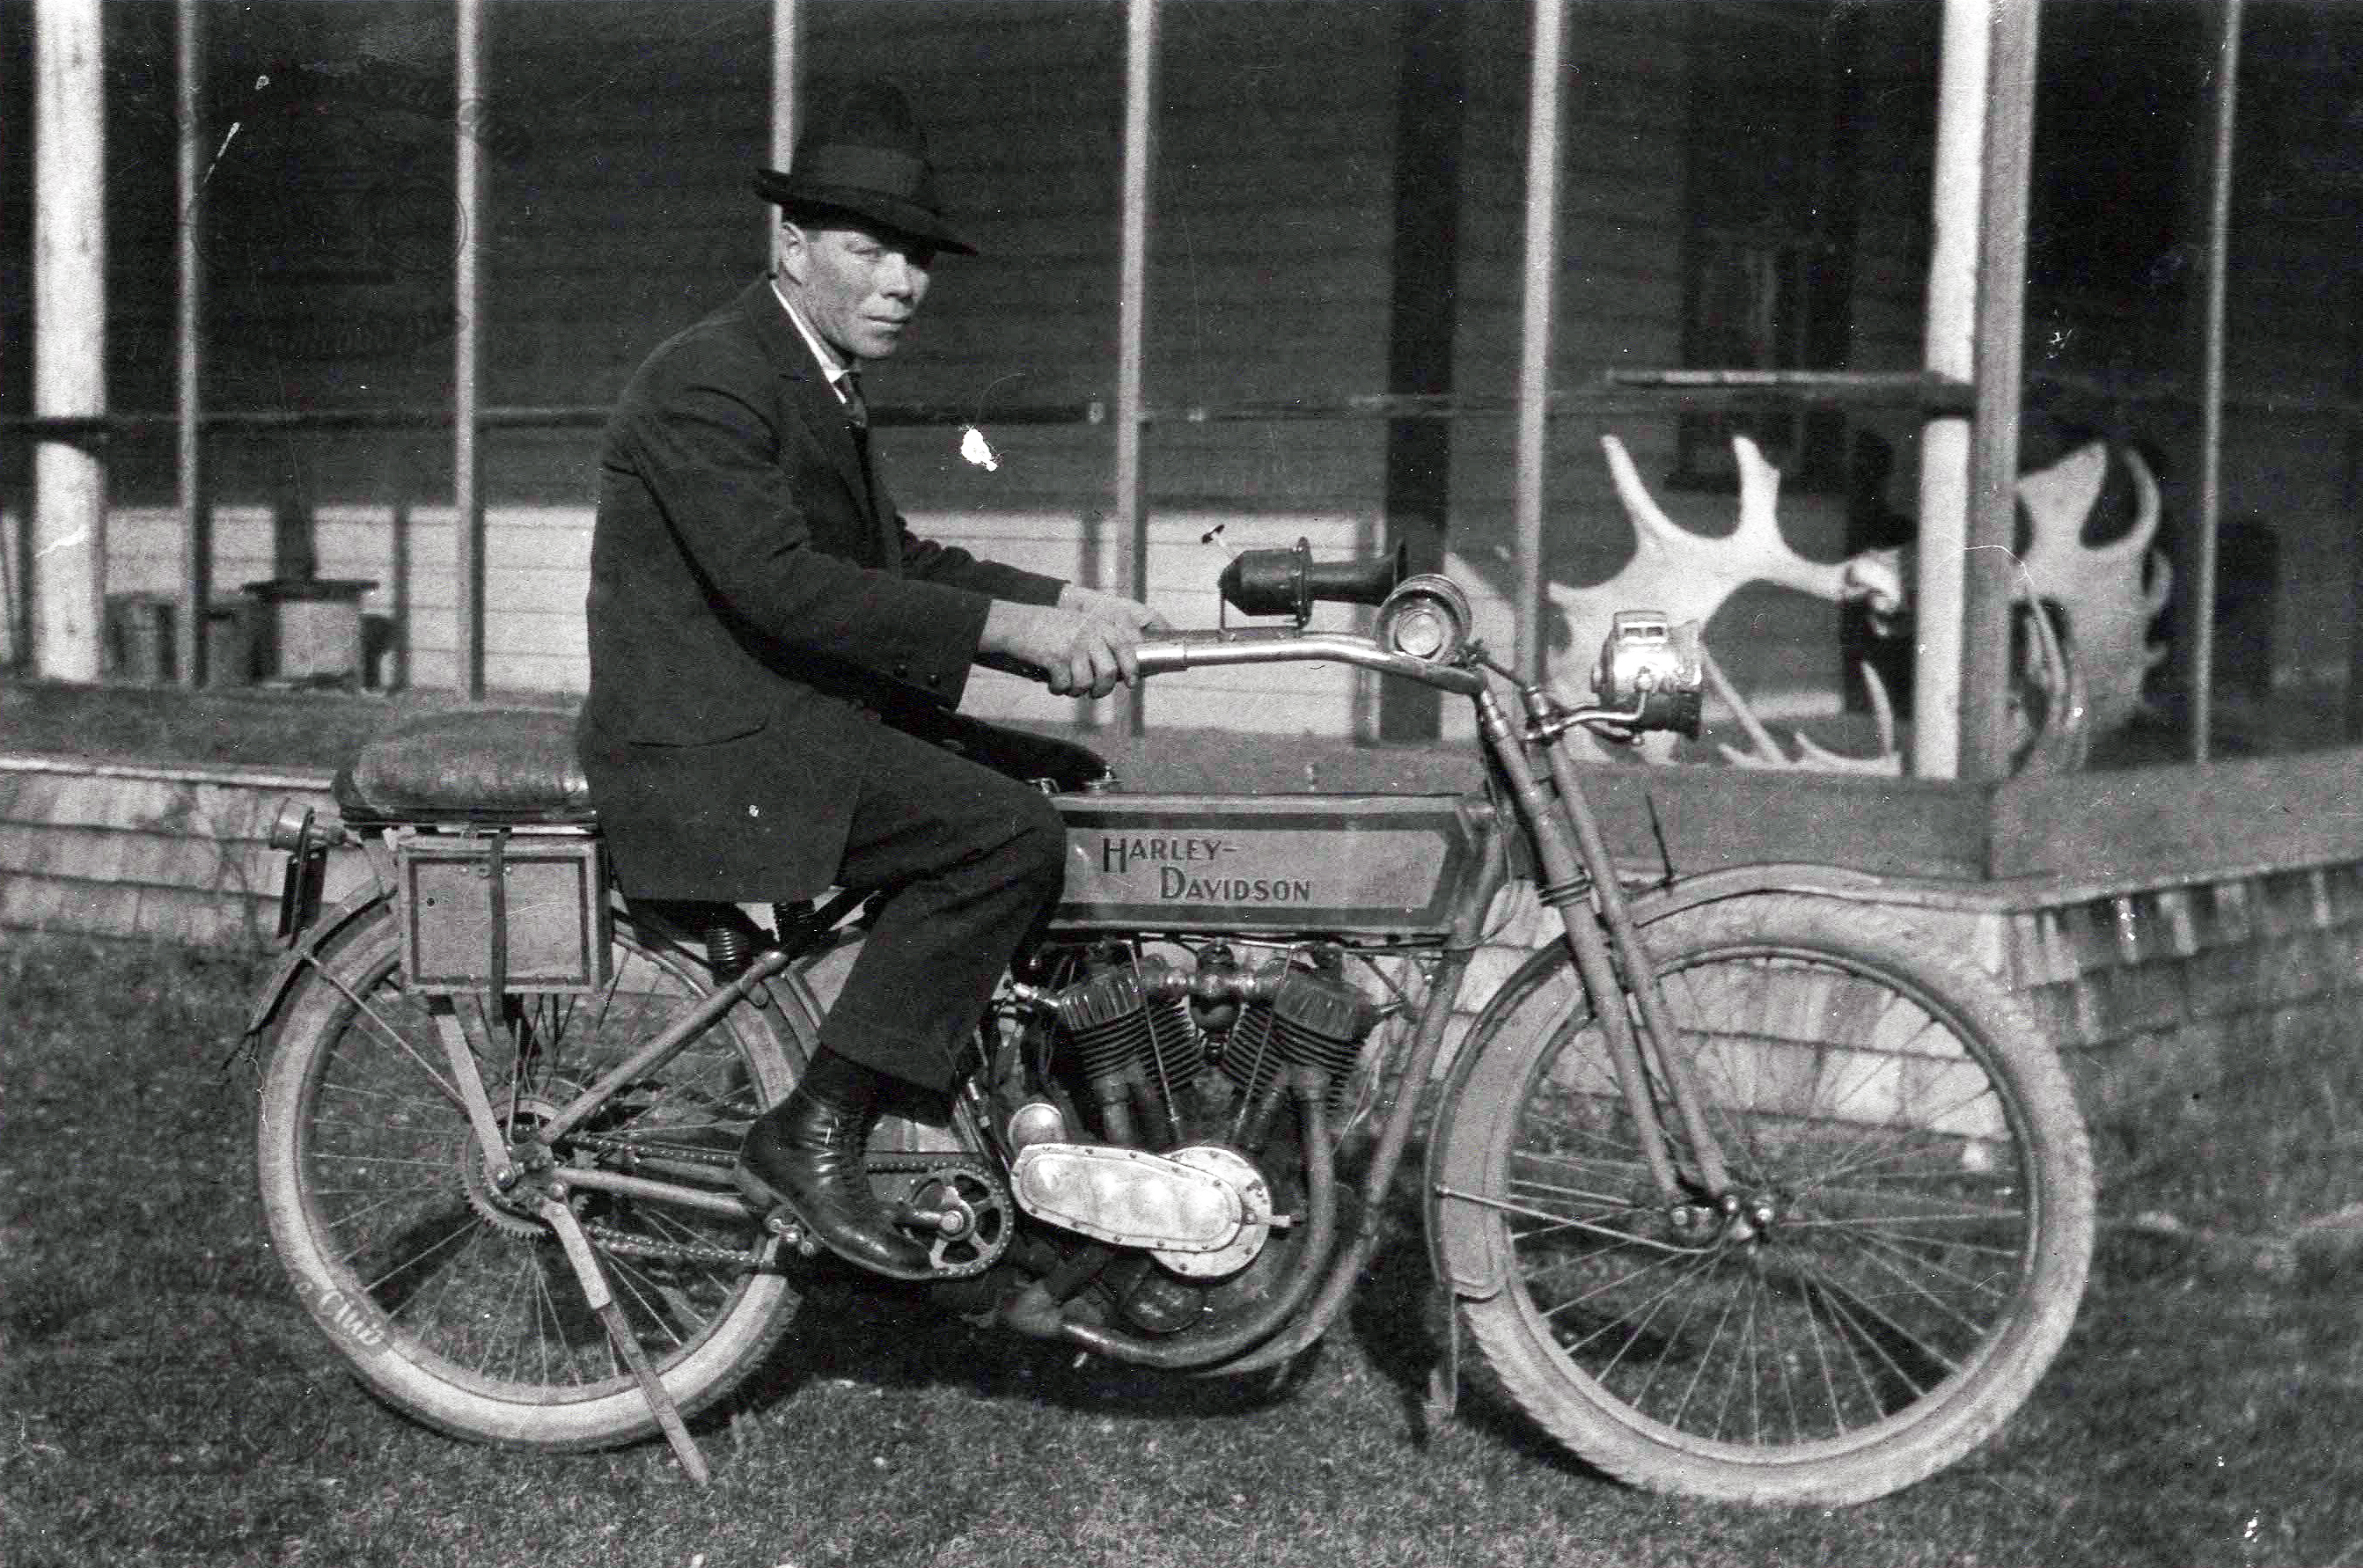 Archie Cox, a member of the Manitoba Motorcycle Club astride his circa 1913 Harley Davidson. Photo taken in 1918.